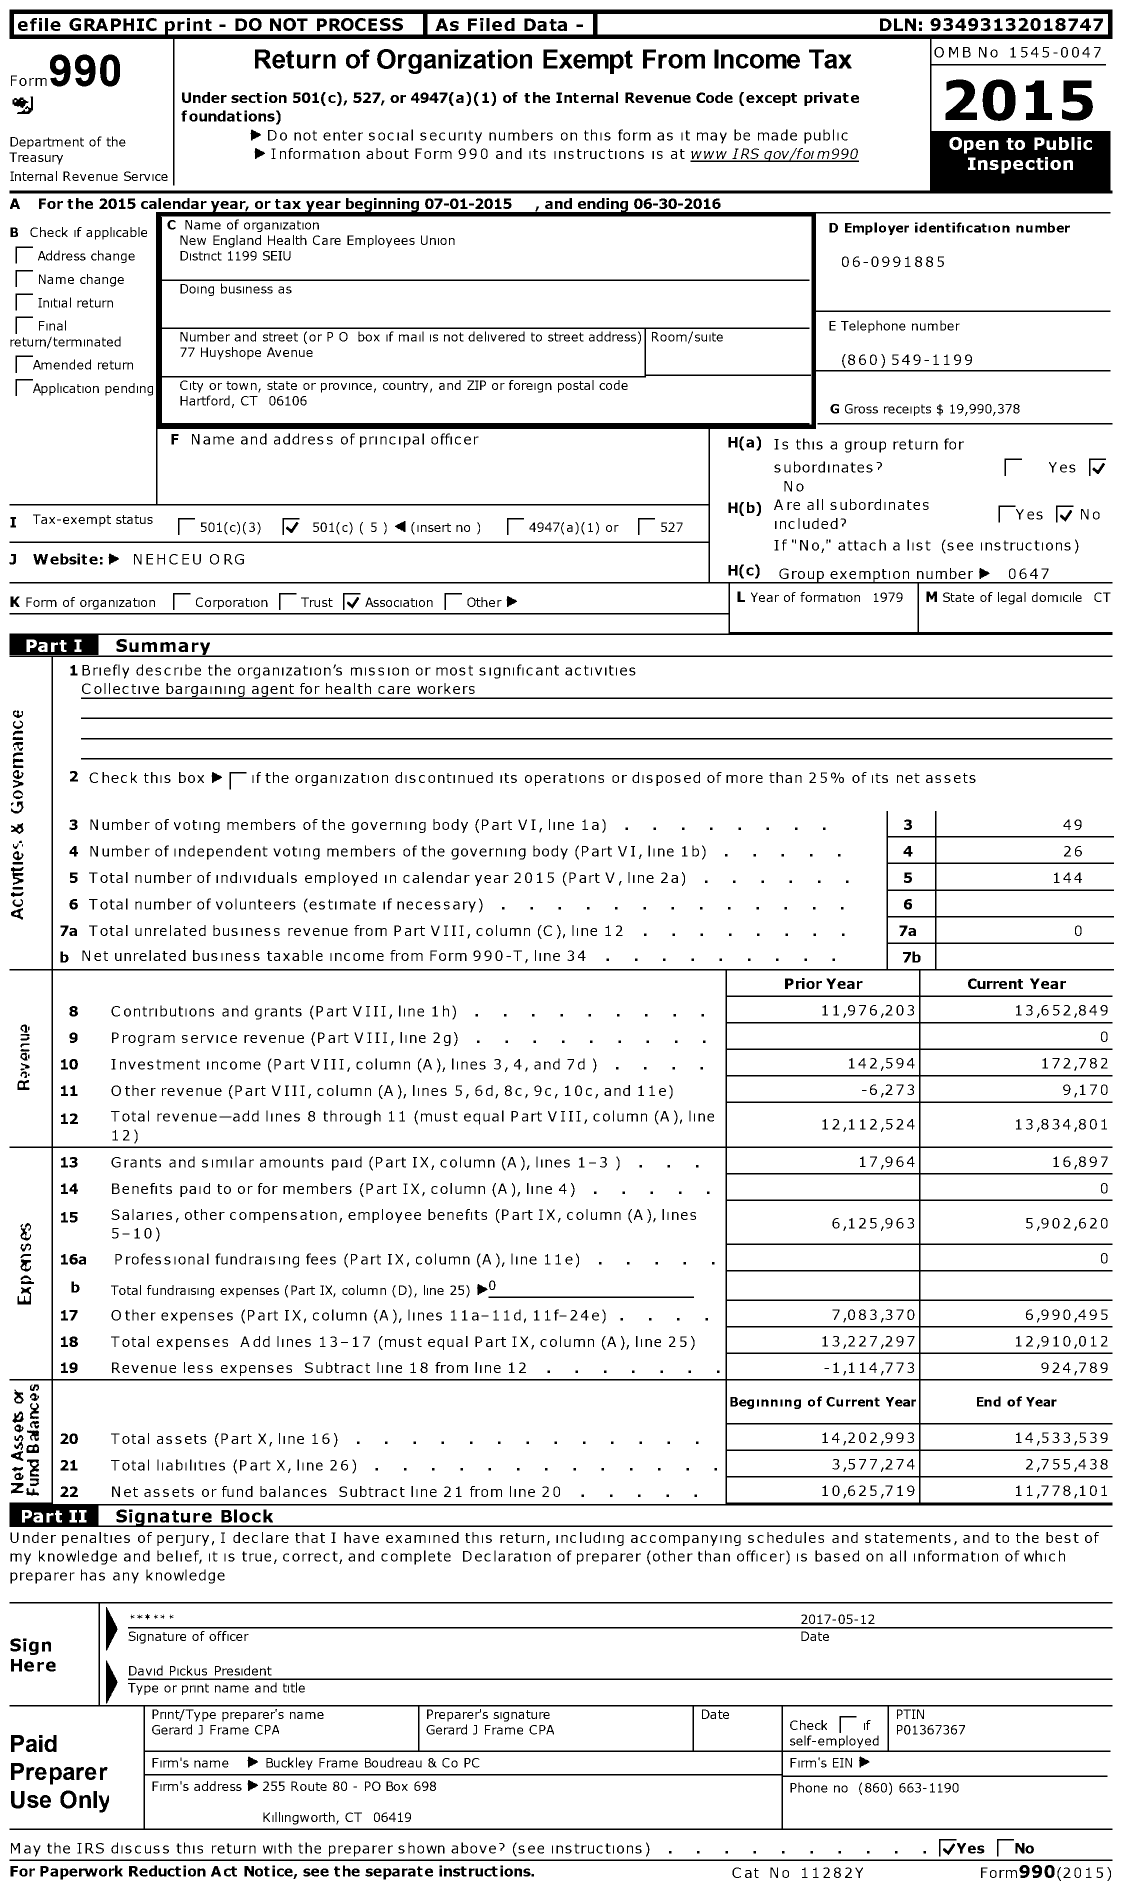 Image of first page of 2015 Form 990O for Service Employees International Union 1199 New England Health Care Employee